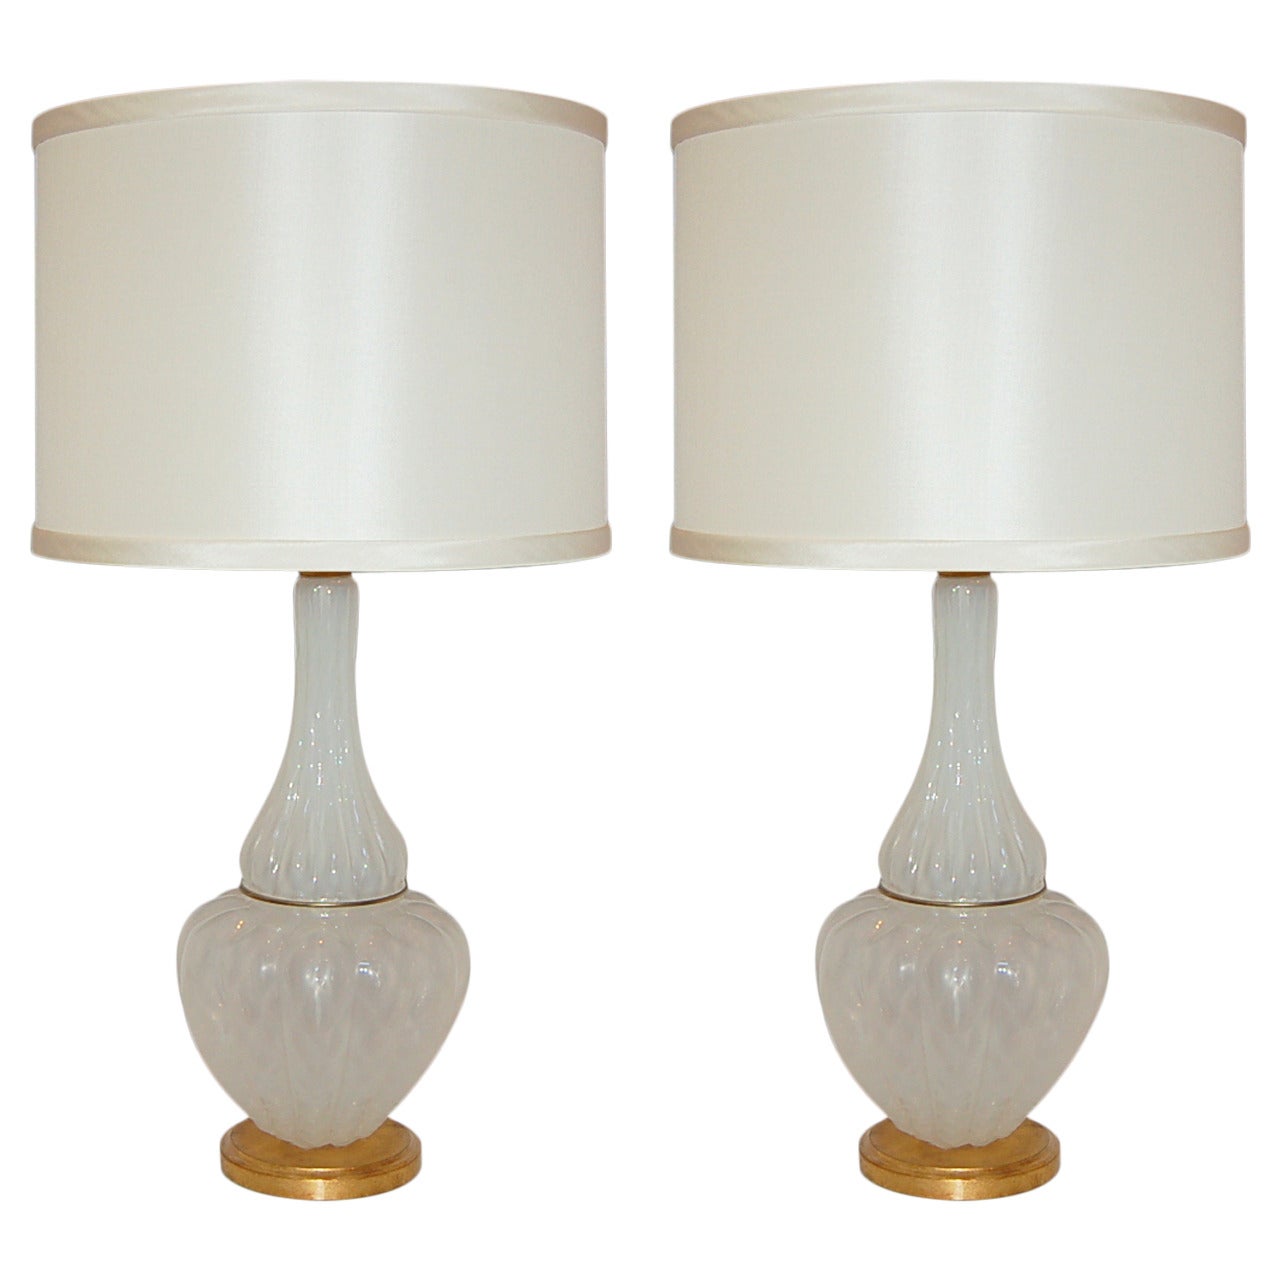 Pair of Vintage White Opaline Murano Lamps by Marbro For Sale